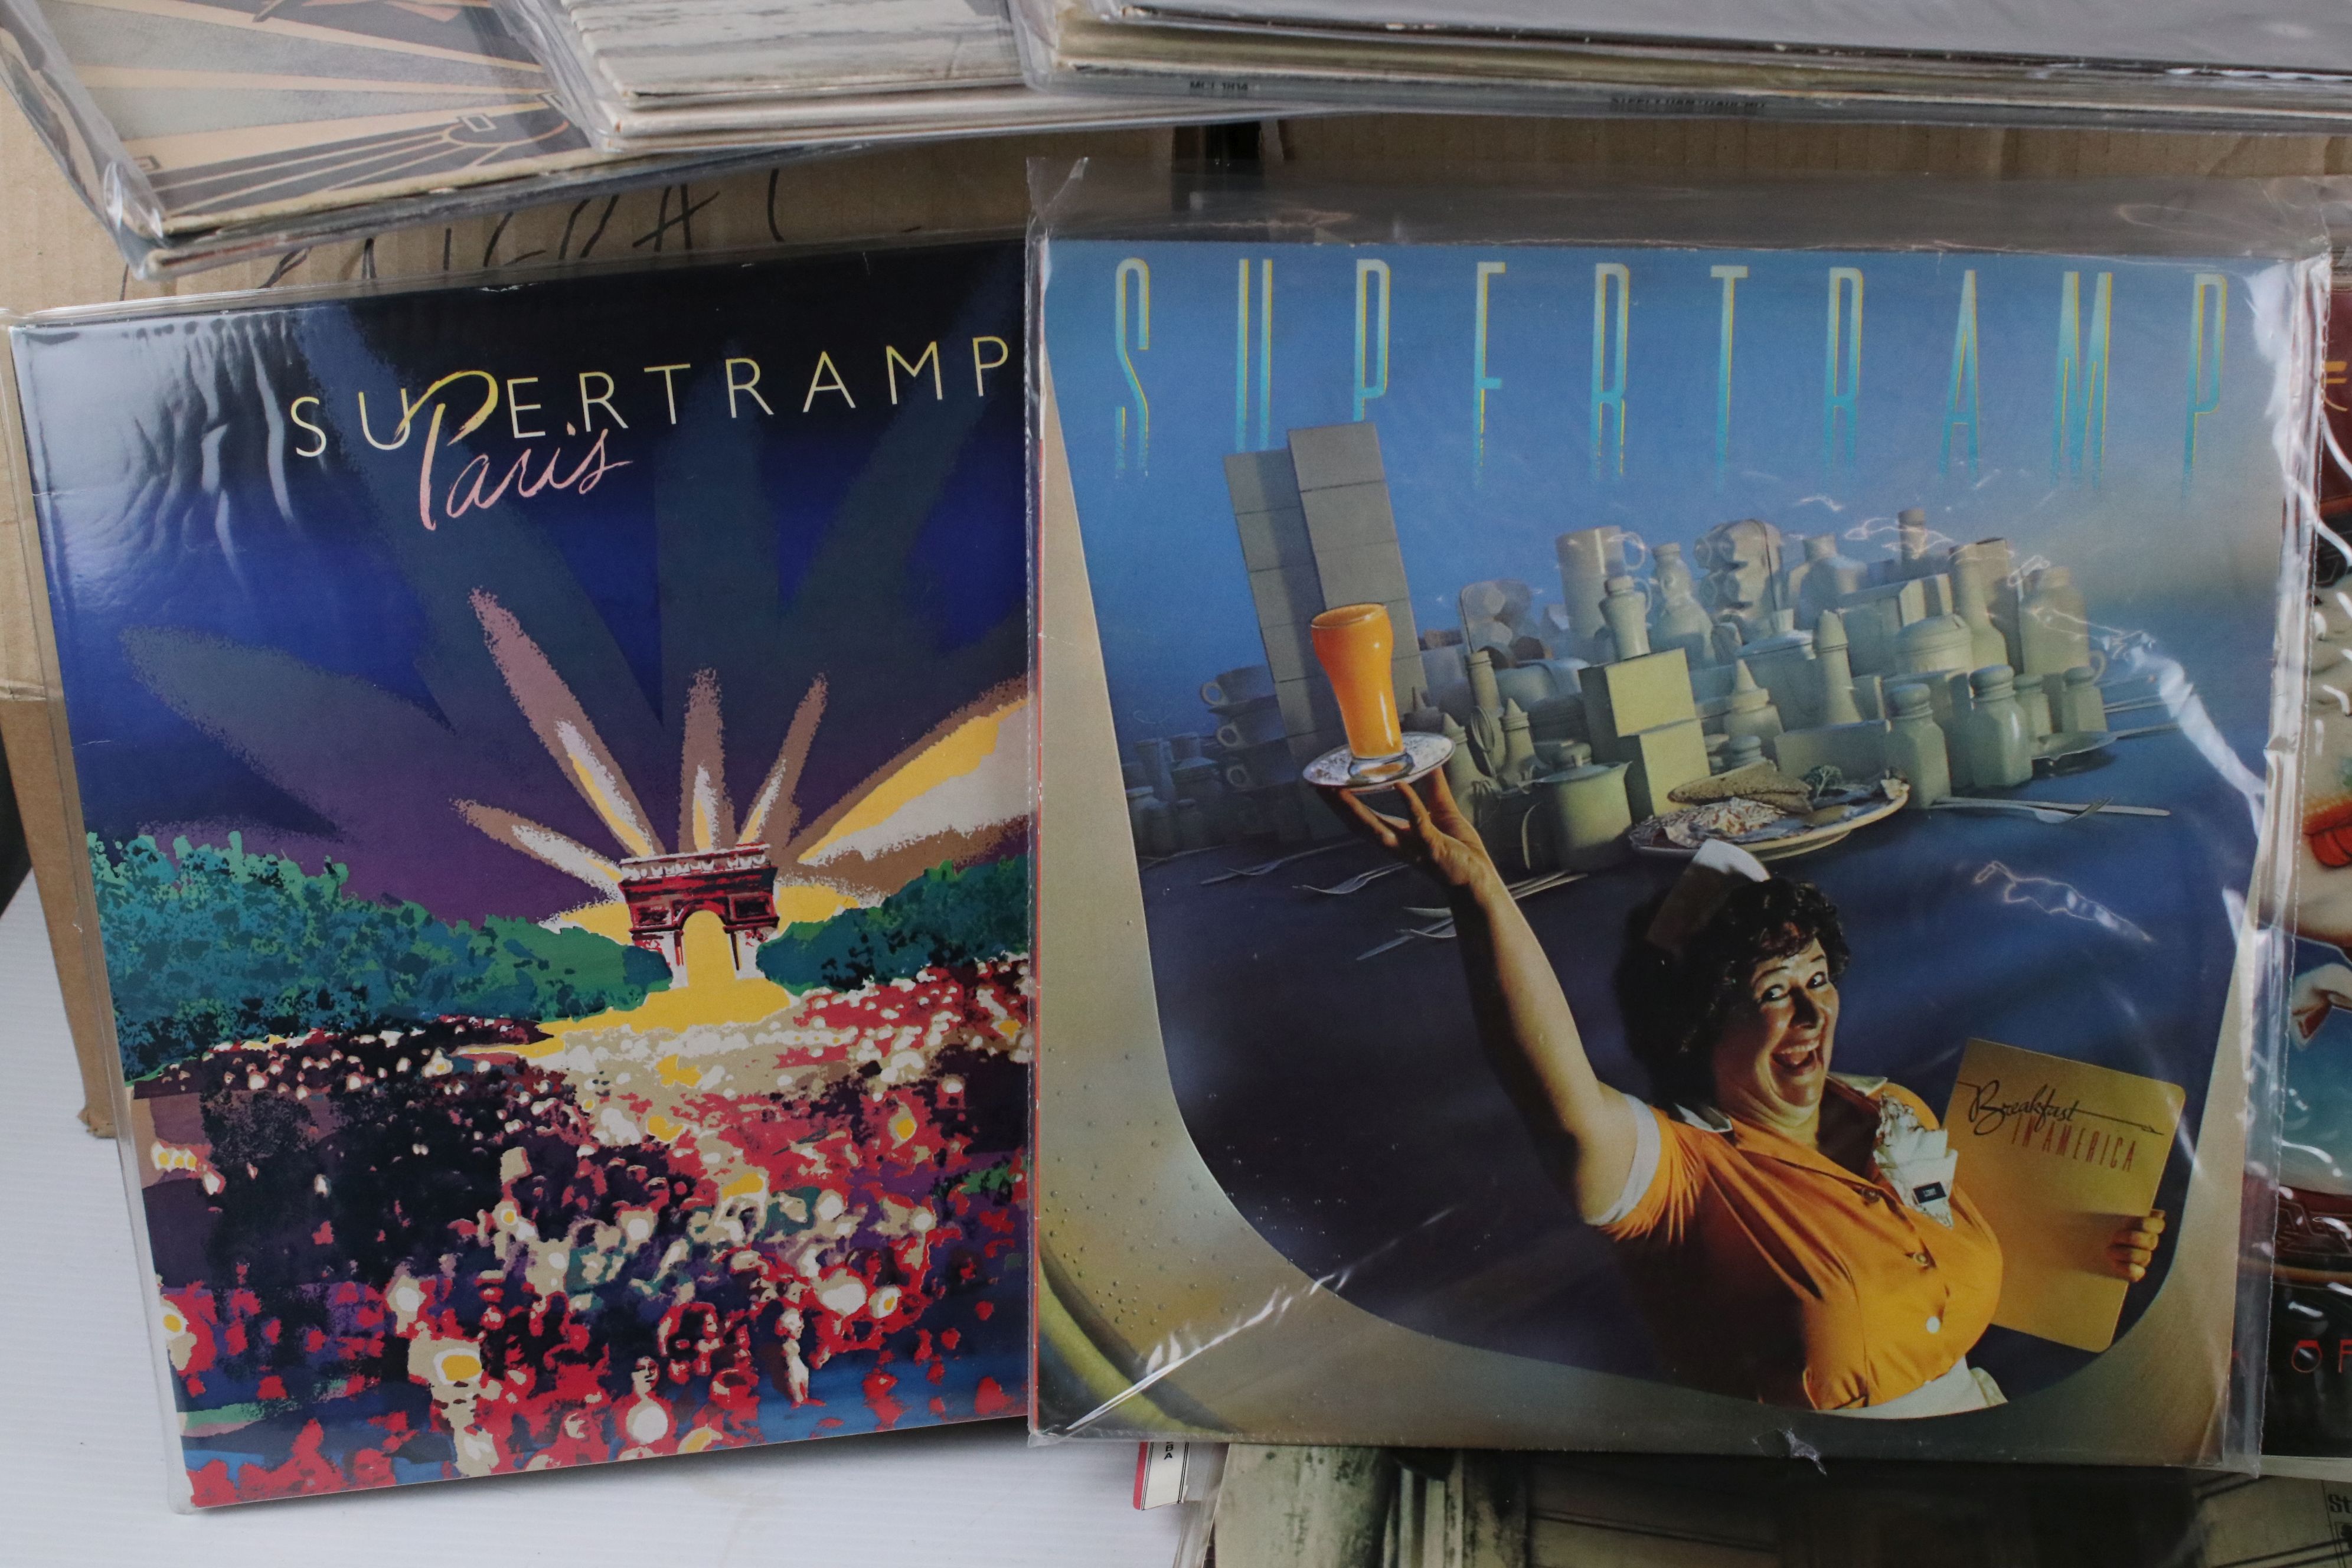 Vinyl - Collection of over 100 rock & pop LP's including Paul Simon, America, Allman Brothers, - Image 4 of 7